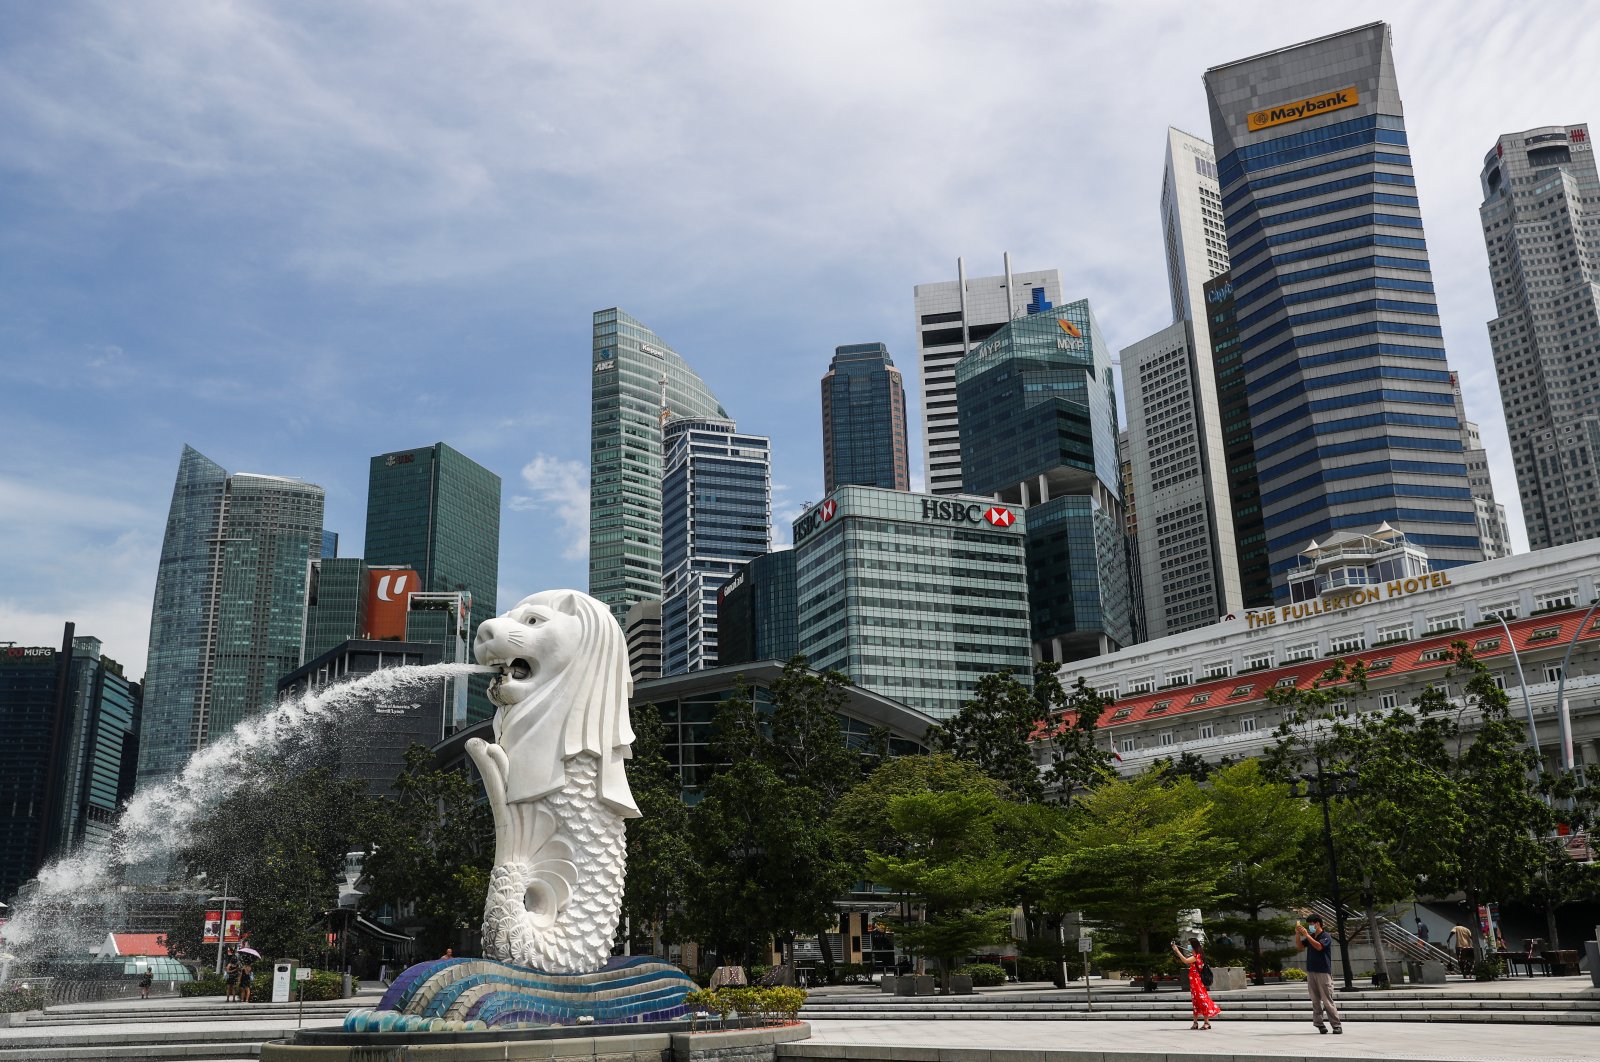 People are dwarfed against the financial skyline as they take photos of the Merlion statue along the Marina Bay area in Singapore, June 30, 2020. (AP Photo)